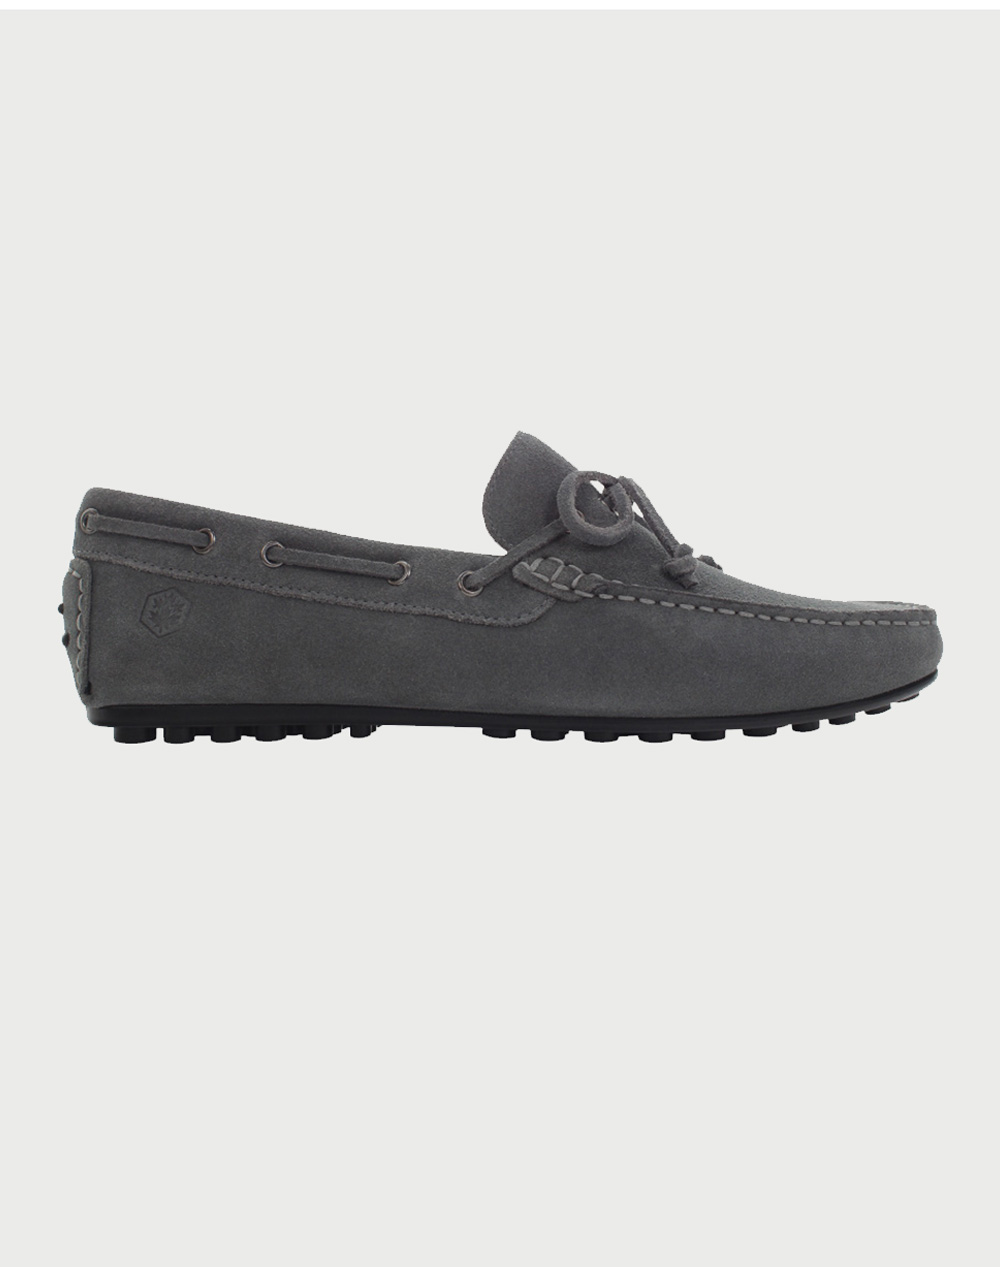 LUMBERJACK MAIN DRIVE MOCASSIN LACE UP SUEDE ΠΑΠΟΥΤΣΙ ΑΝΔΡΙΚΟ SM81802002A01CD017 Gray